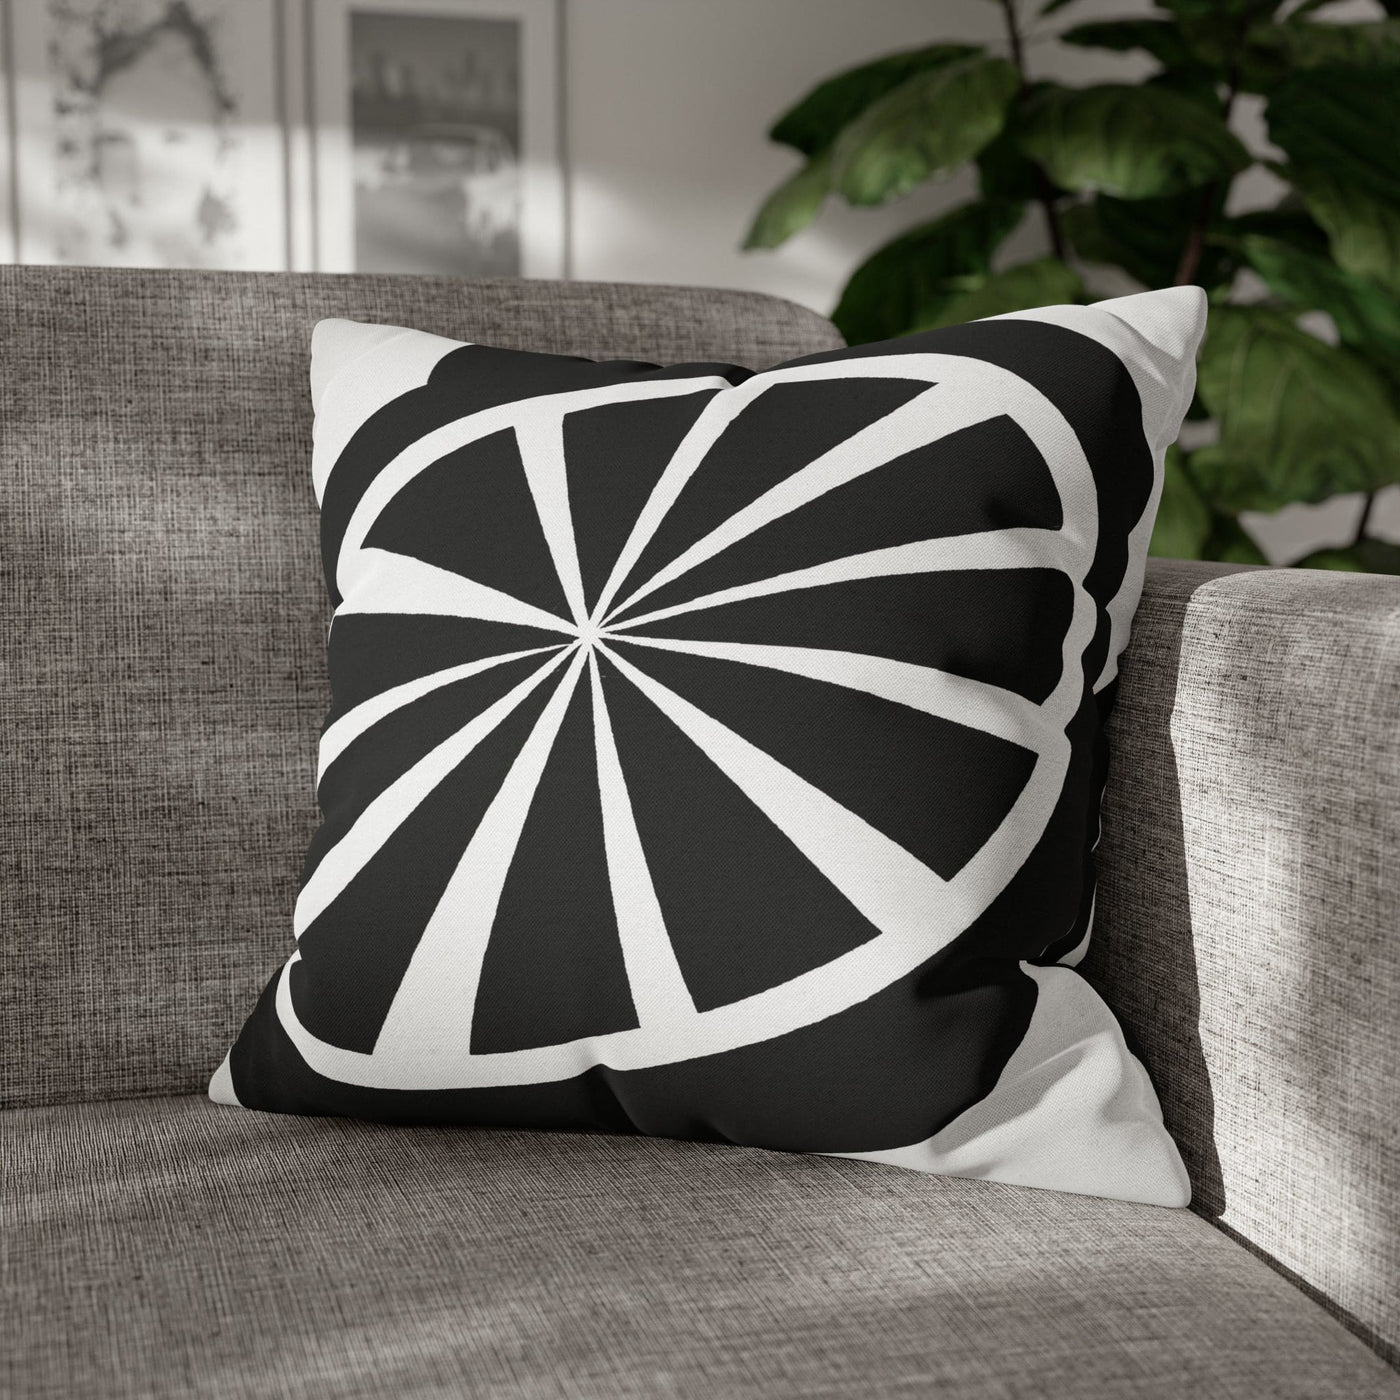 Decorative Throw Pillow Covers With Zipper - Set Of 2 Black And White Geometric